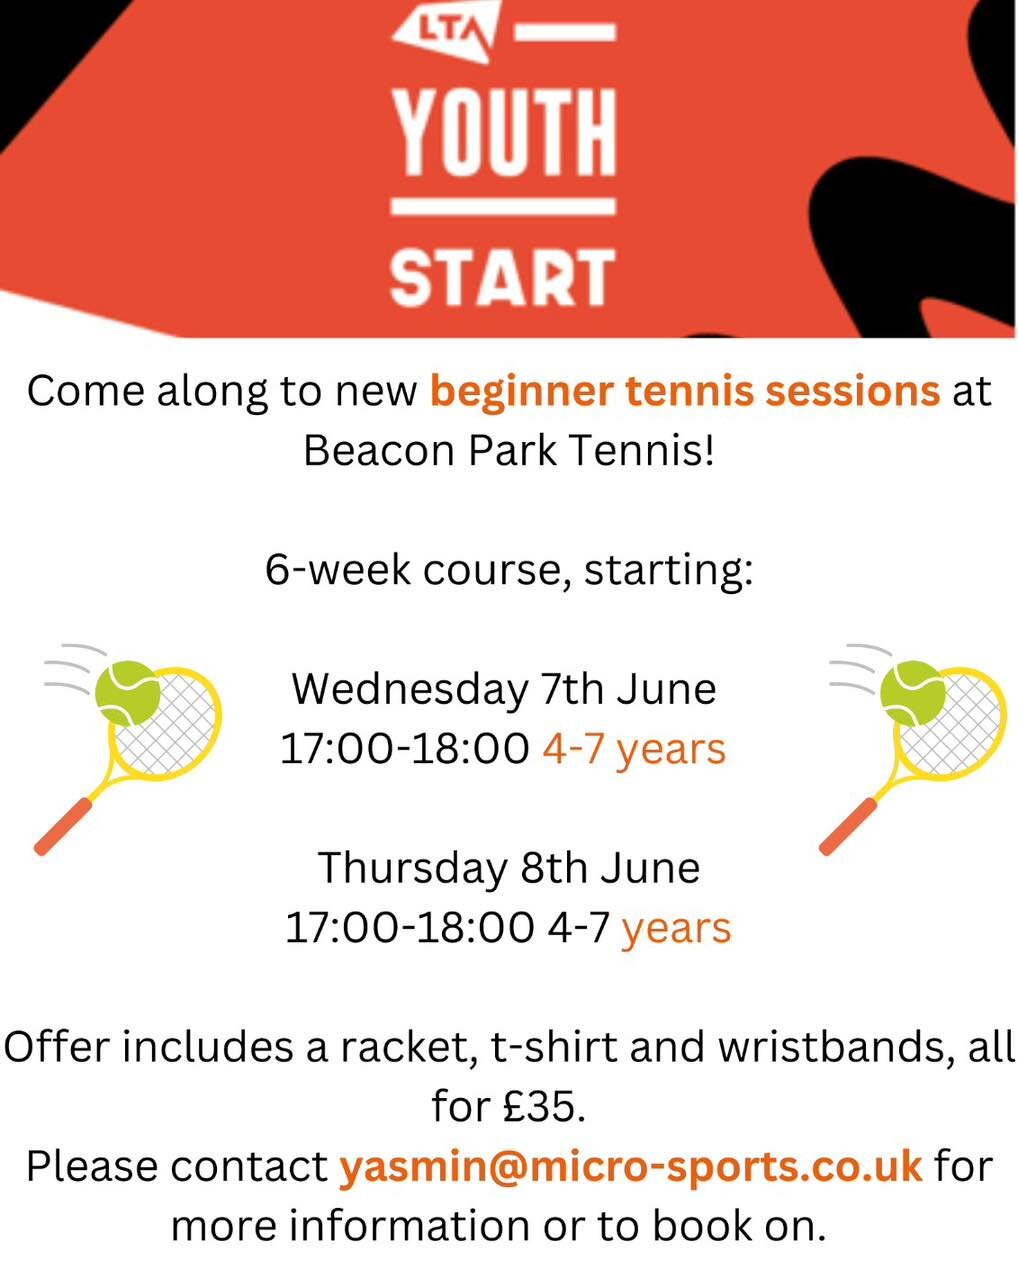 Hi Everyone!

Beacon Park Tennis have an exciting new programme starting after half term for children aged 4-11 years old. 

Children will get 6 lessons, plus a racket, tshirt, wristbands and balls, all for &pound;35! 

This is run by an experienced 